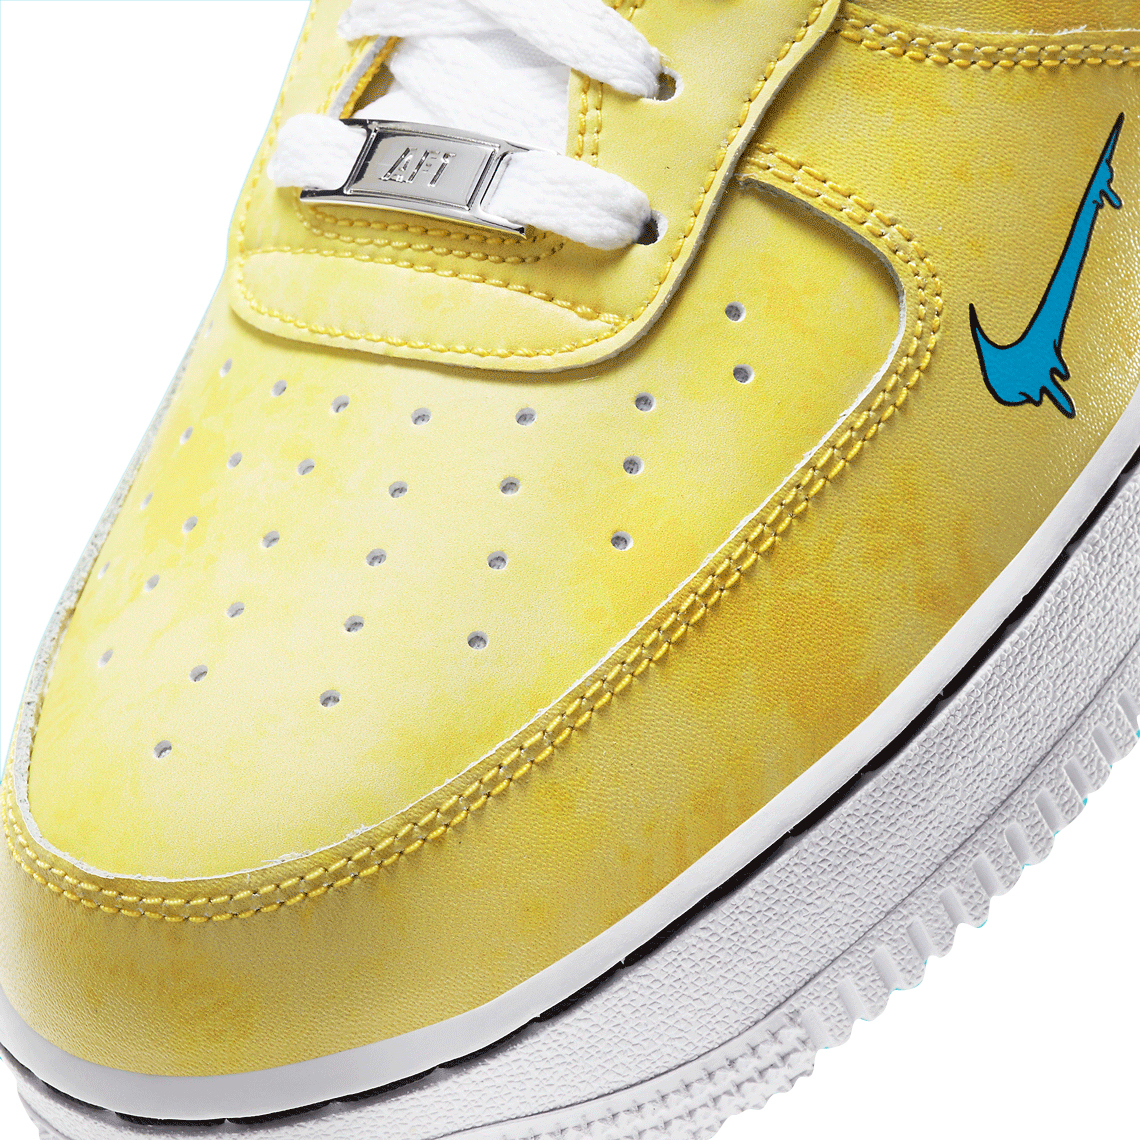  Nike Mens Air Force 1 '07 Lv8 3 Peace, Love and Basketball -  Speed Yellow/Black-Laser Blue Dc1416 700 - Size 11.5